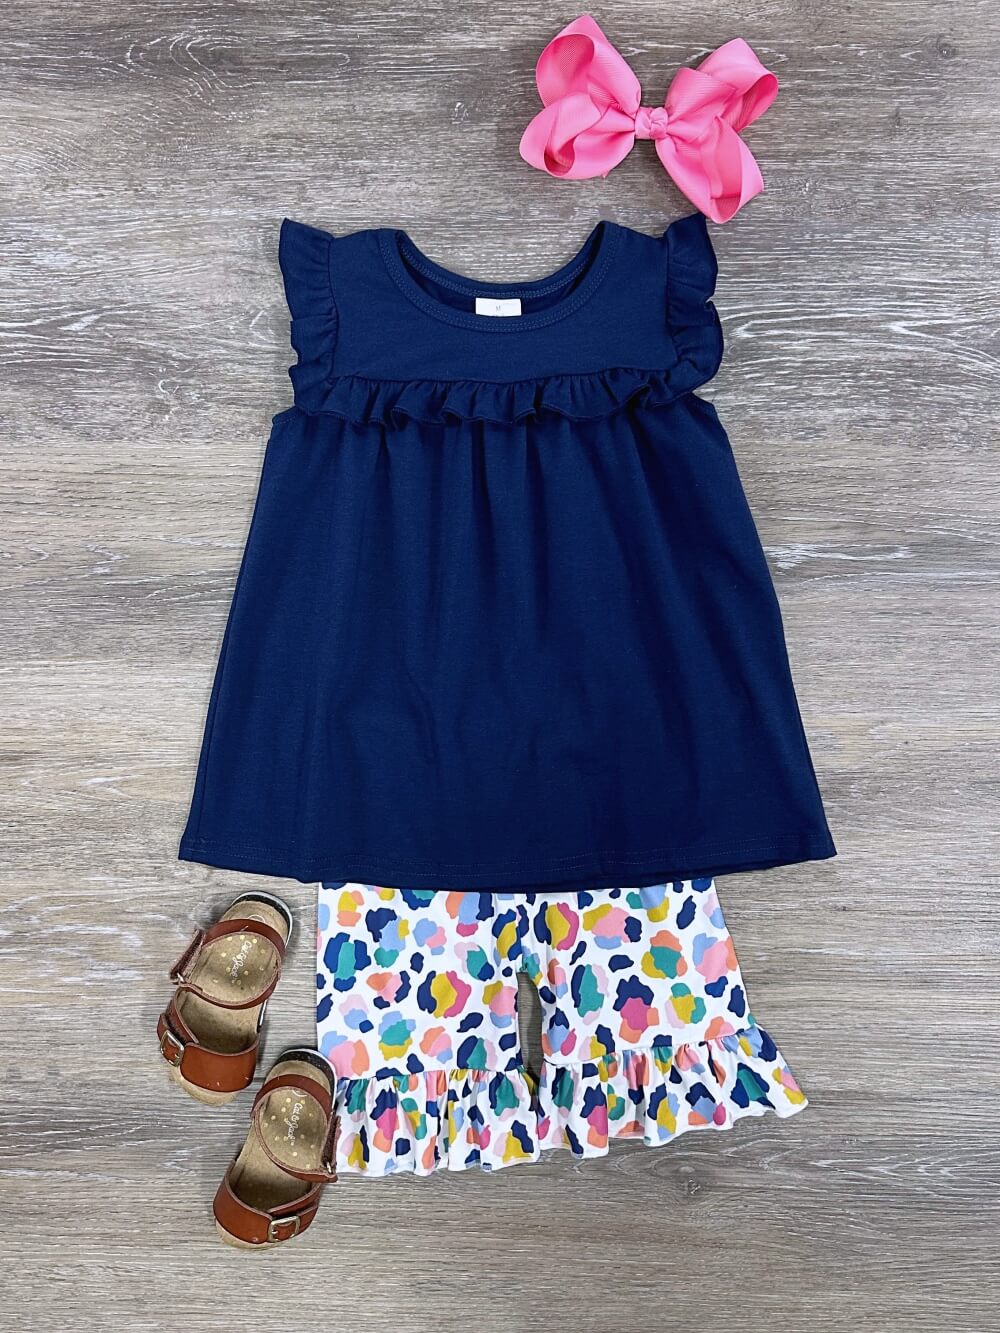 Navy & Leopard Girls Sleeveless Top & Shorts Outfit